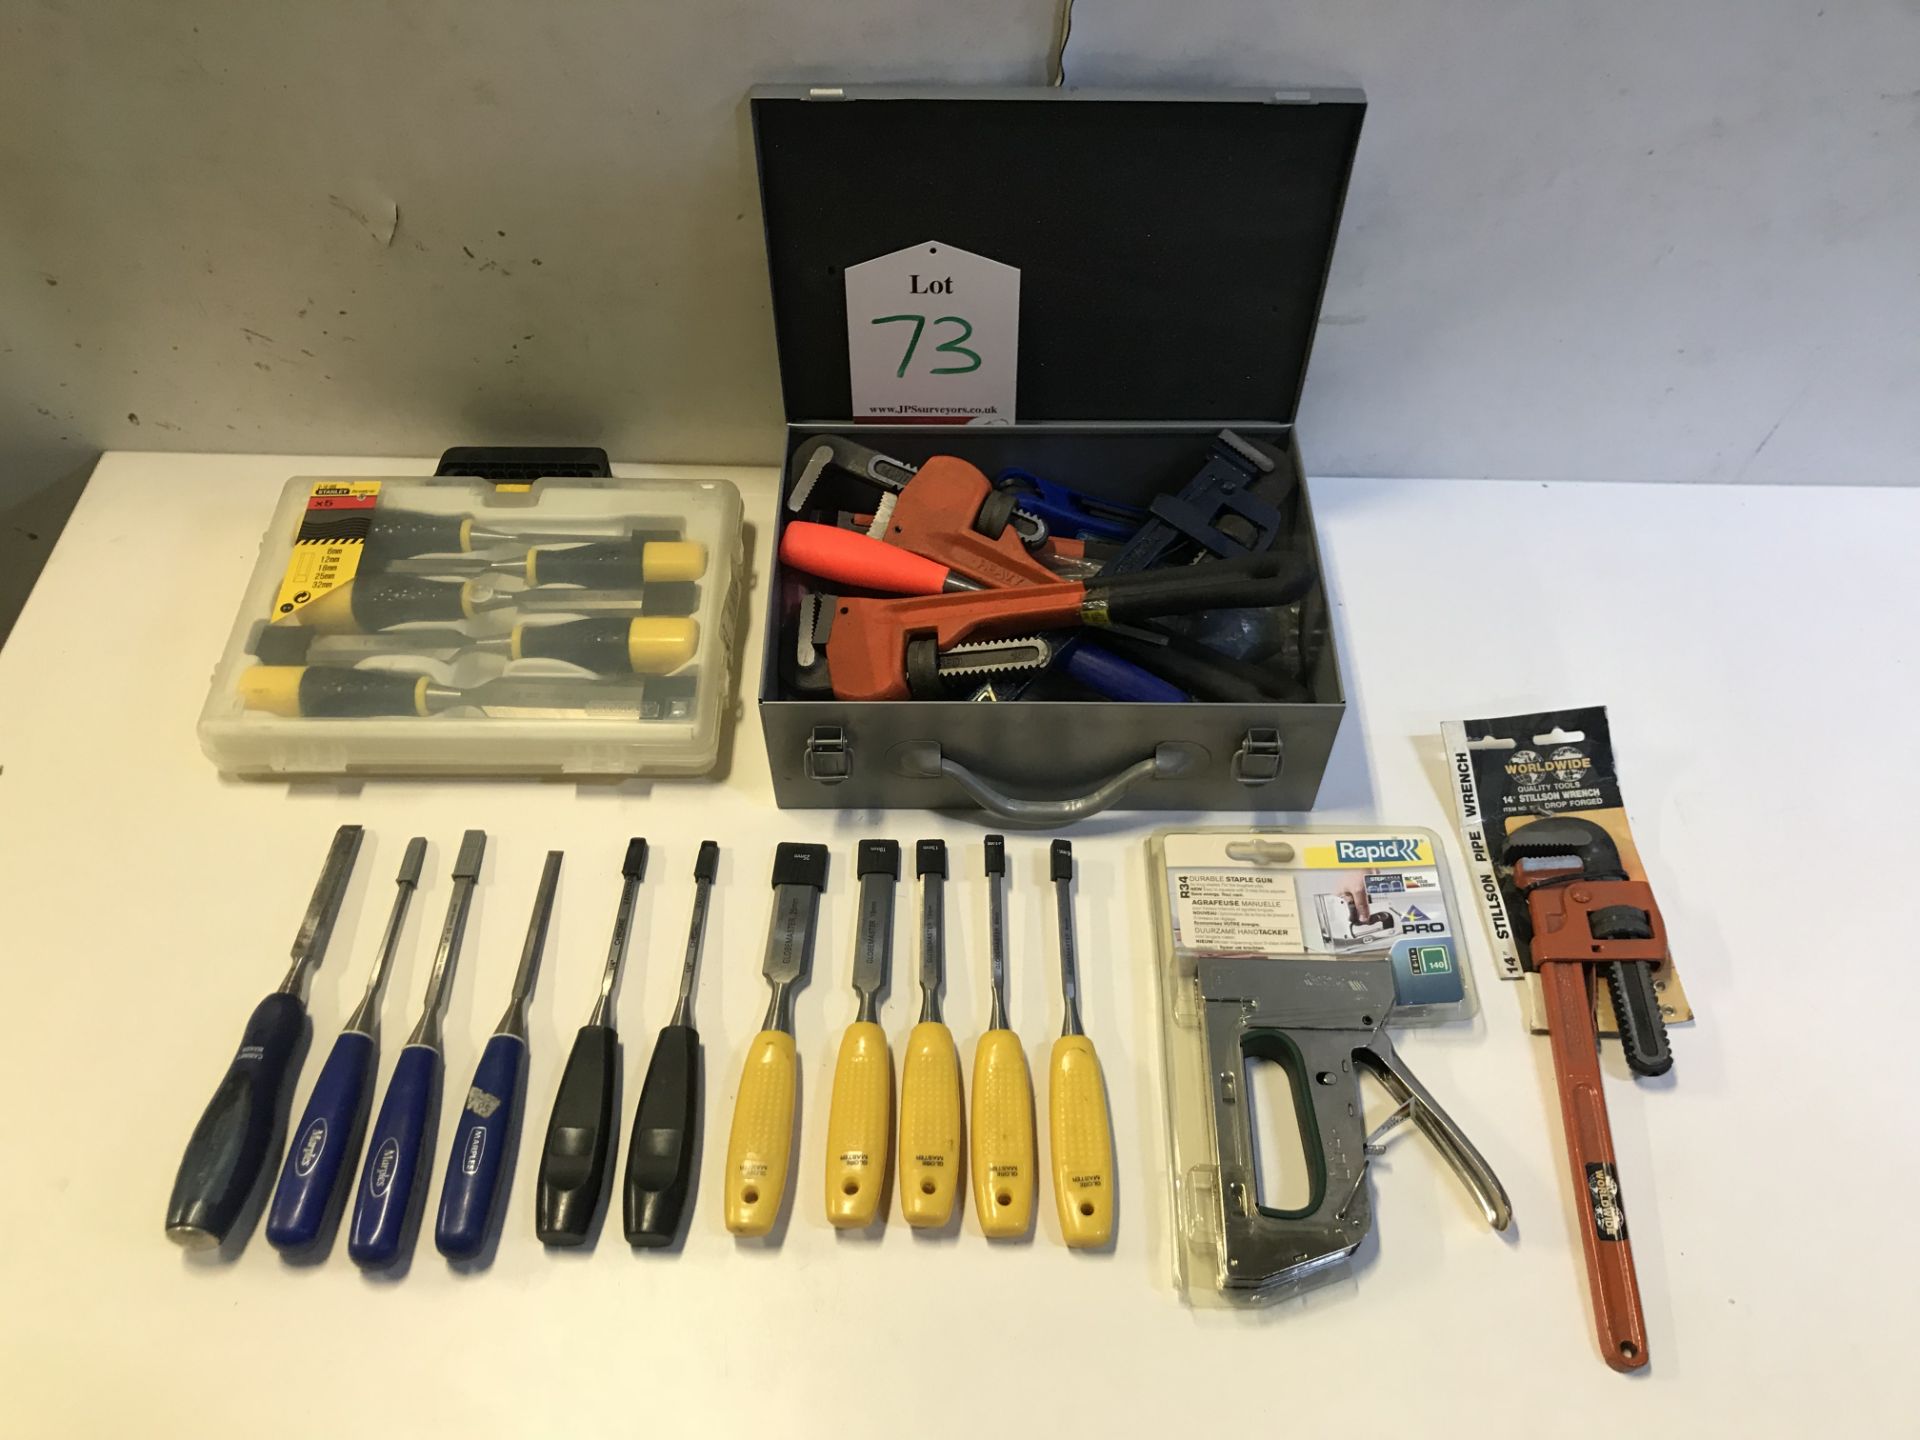 Quantity of various hand tools - Staple Gun, Wrenches, Screwdrivers & Files - as per photos